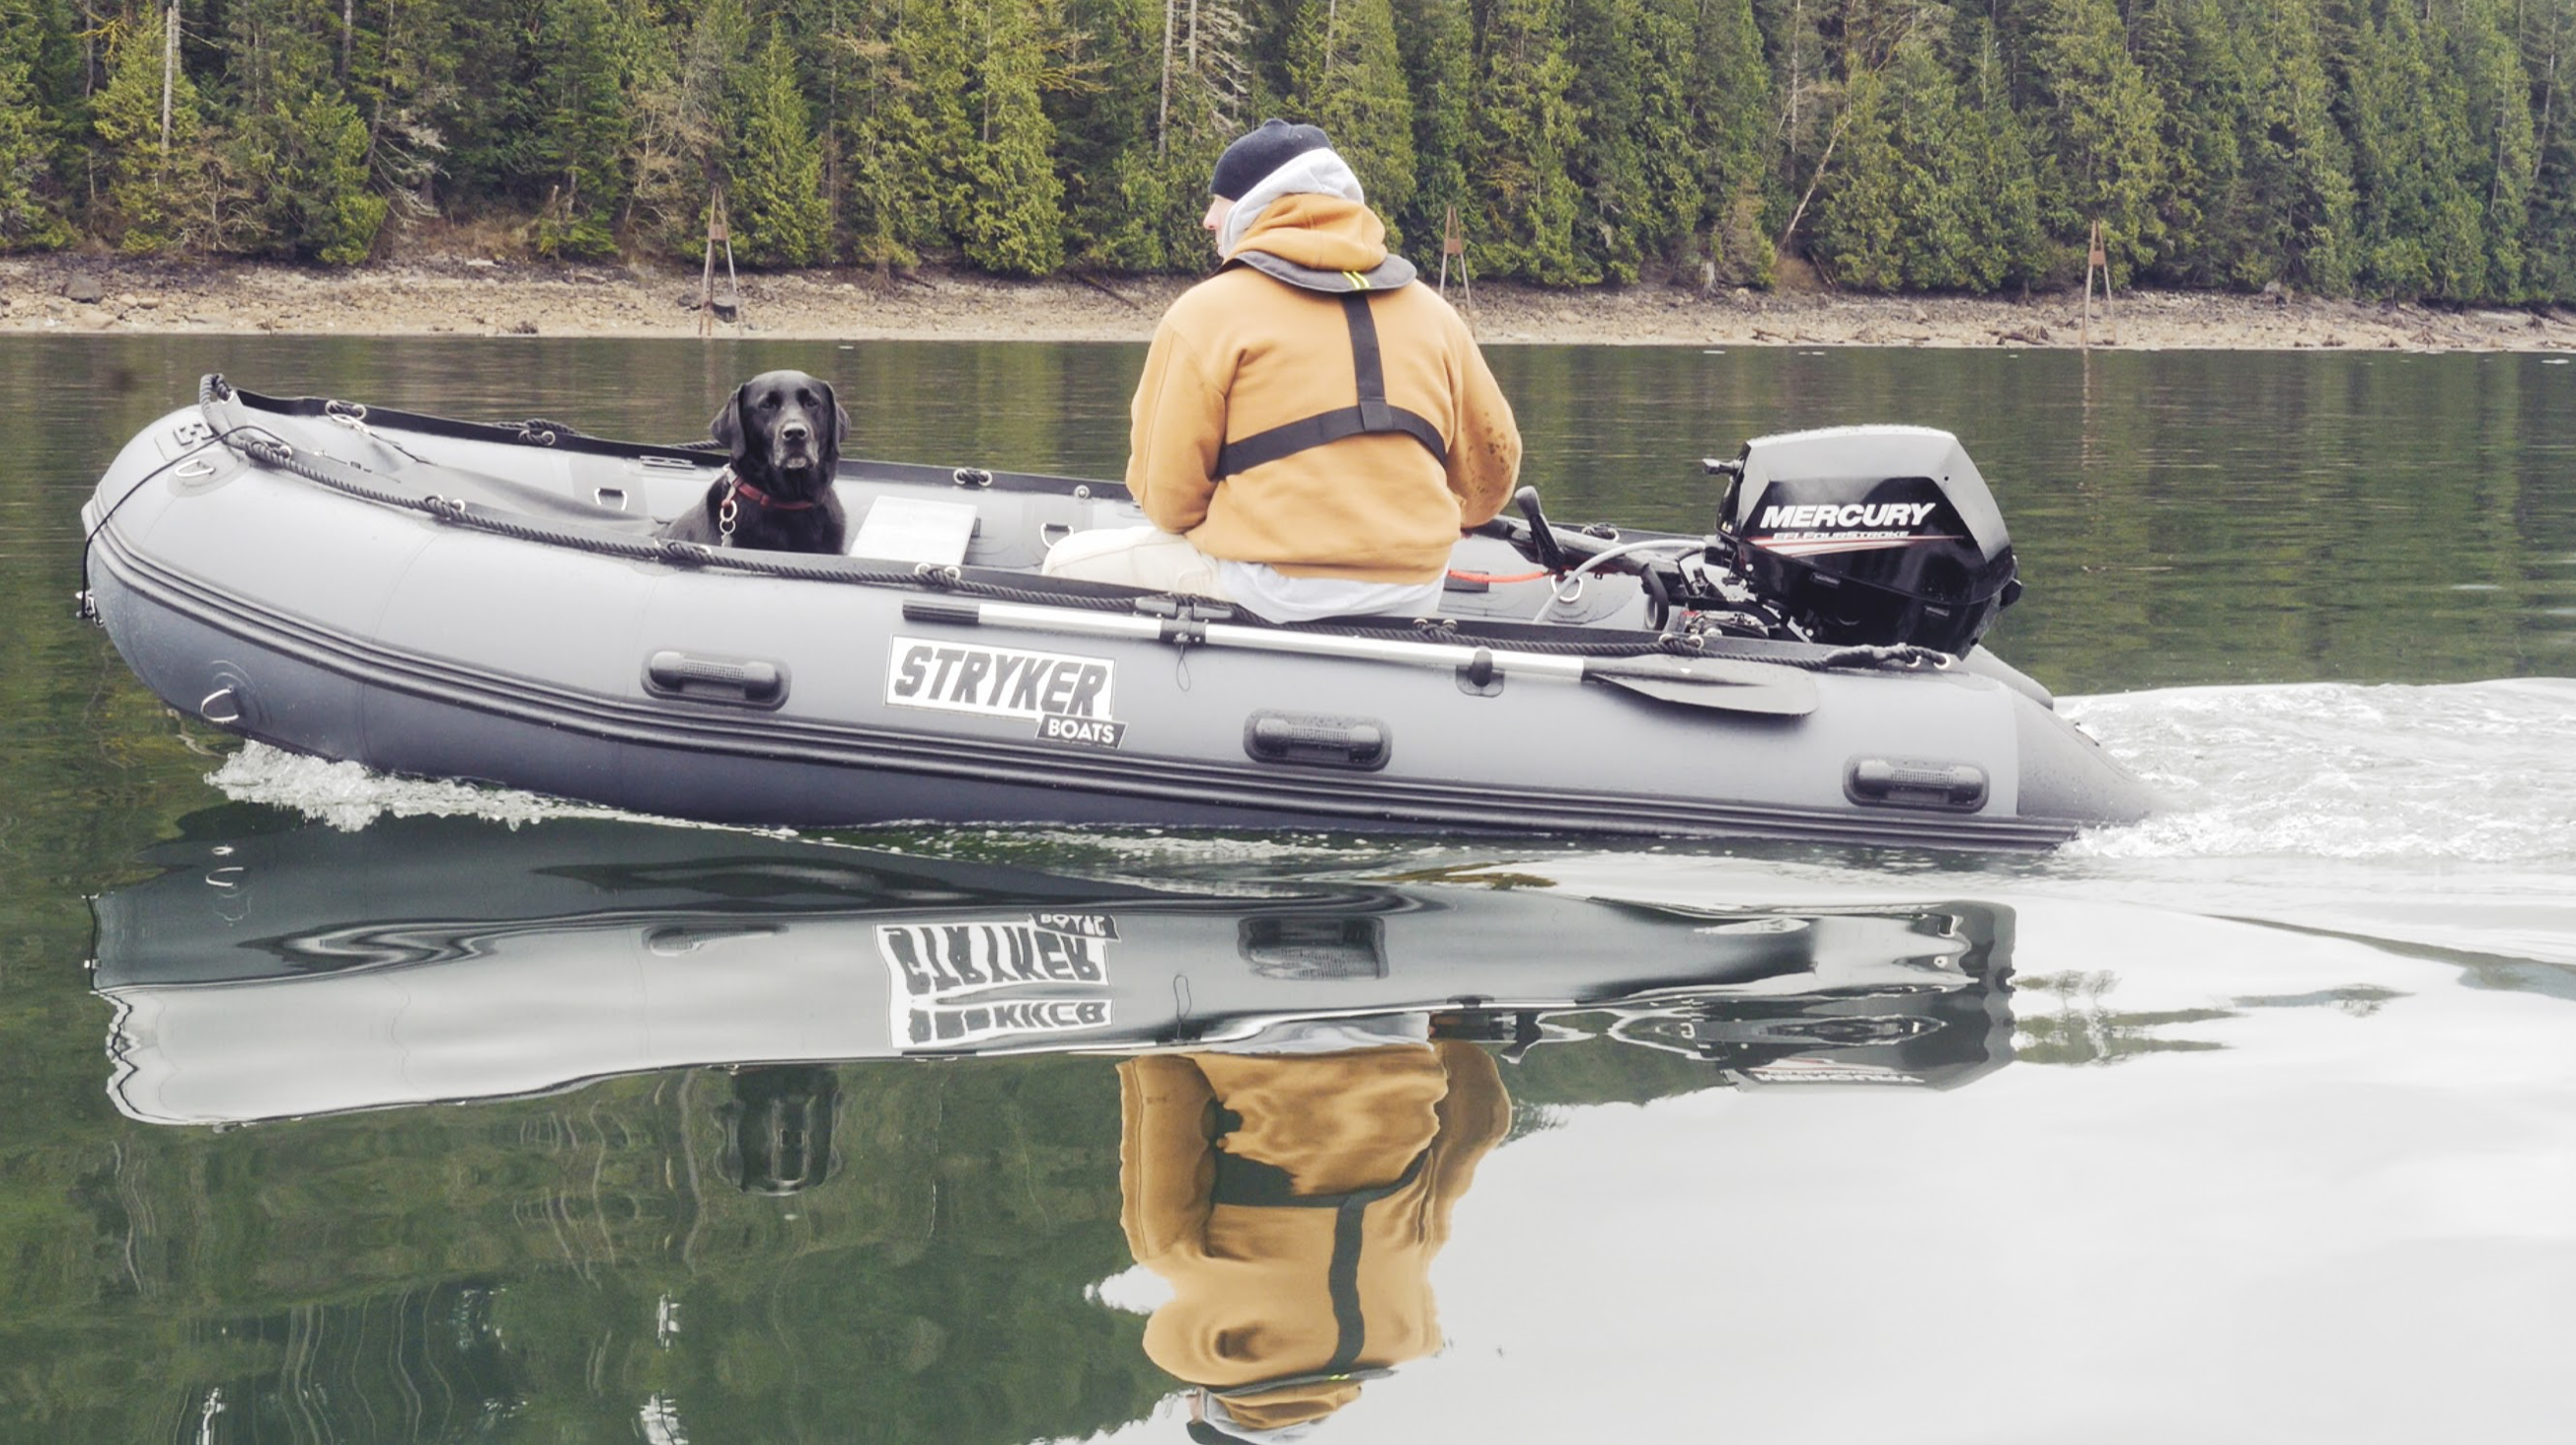 Catching Salmon: The Greatest Guide - Stryker Boats